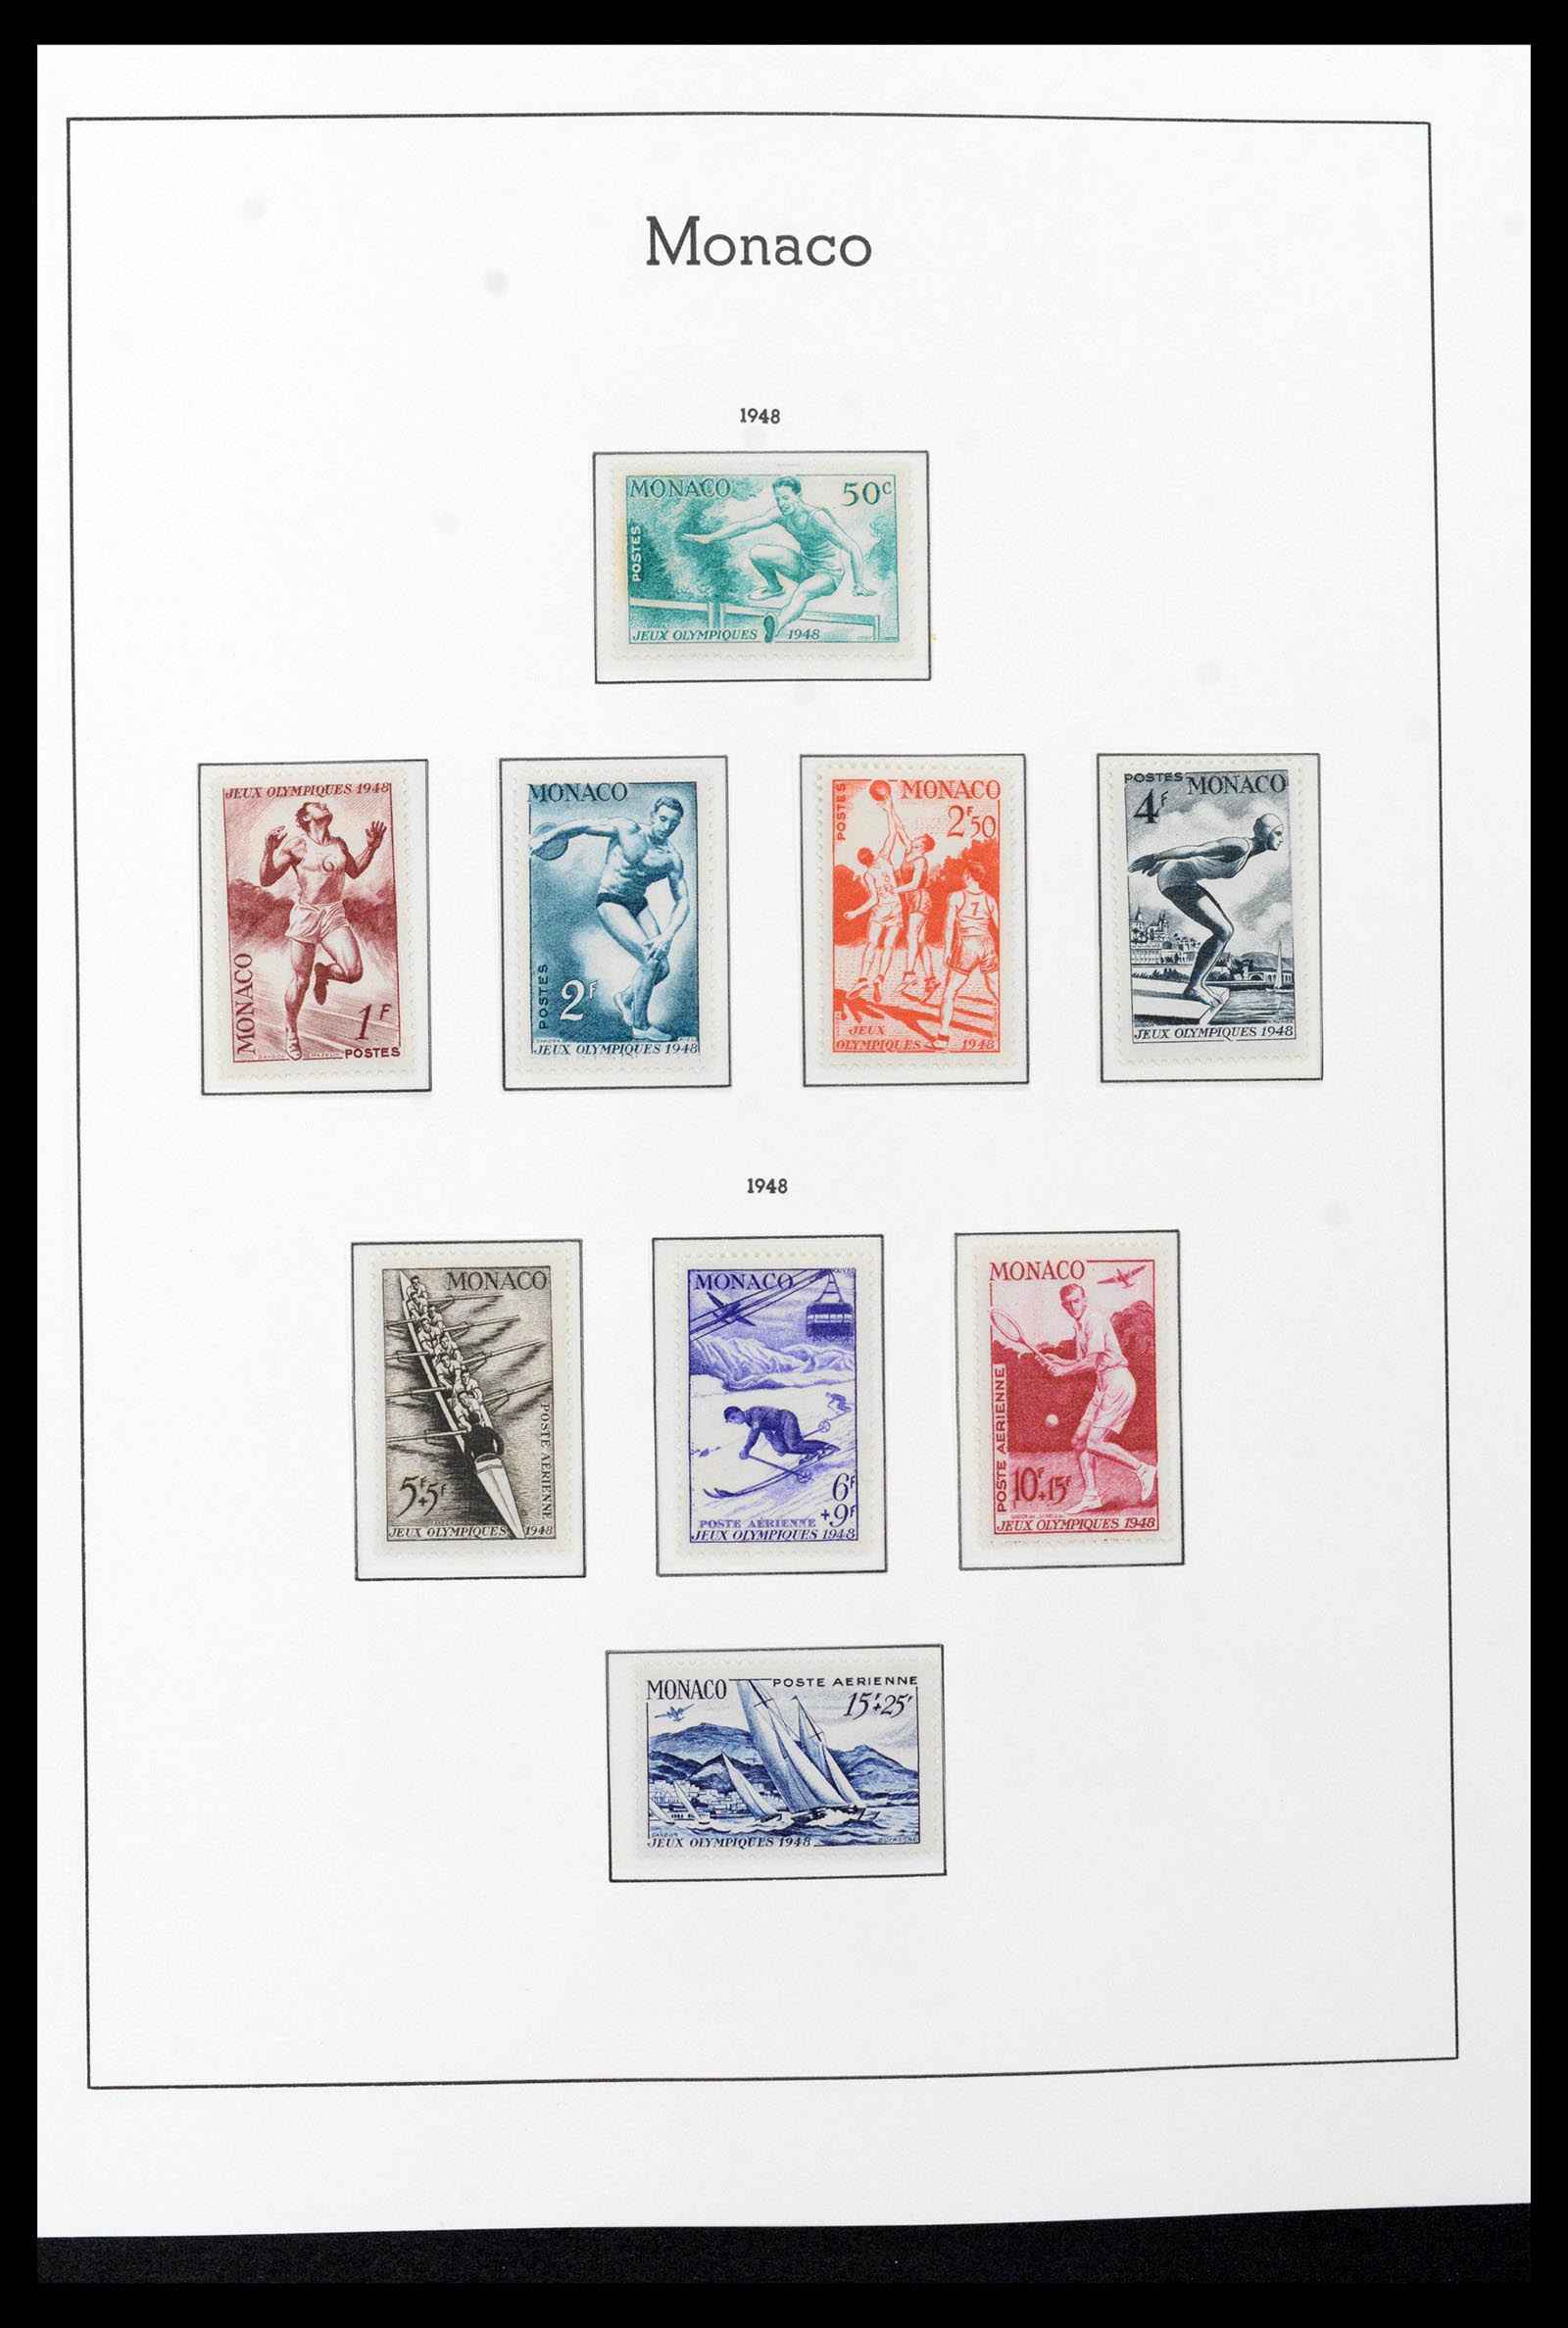 39390 0033 - Stamp collection 39390 Monaco complete 1885-1990.